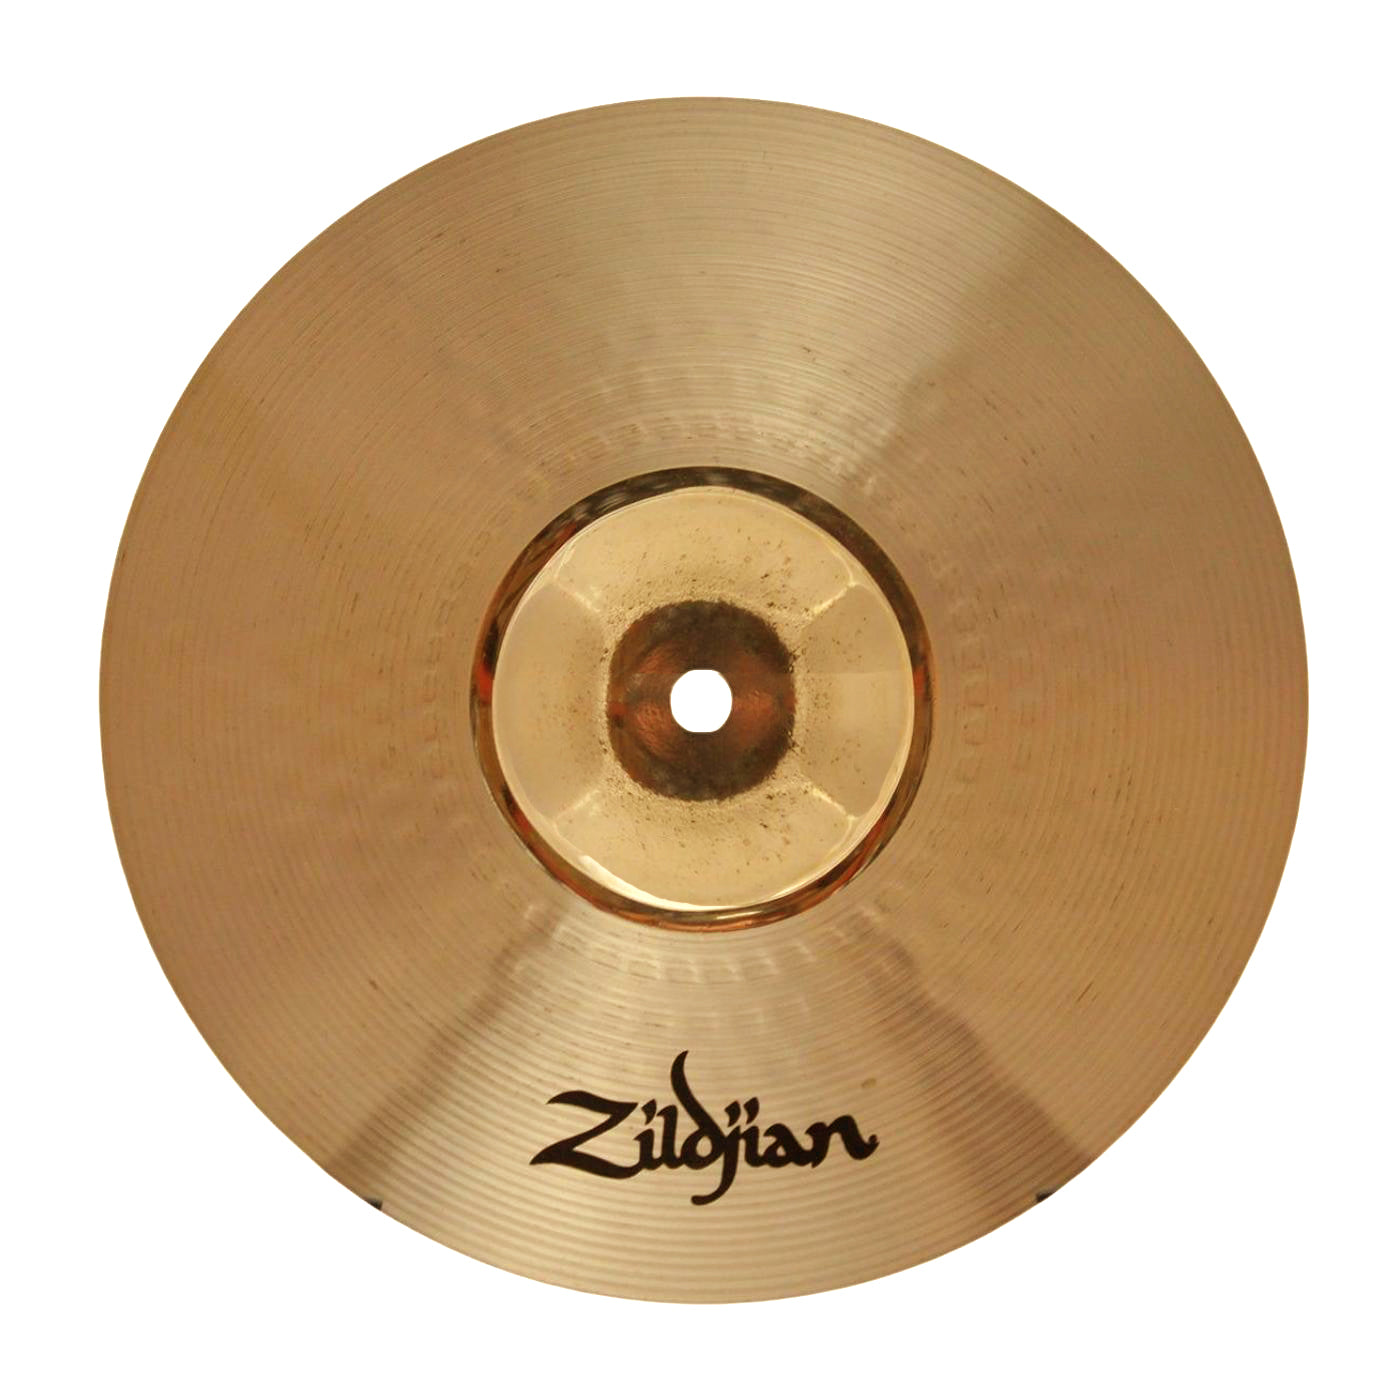 Zildjian A0310 A Series 10" Flash Splash Paper Thin Weight Cymbal with Brilliant & Traditional Finish for Drums